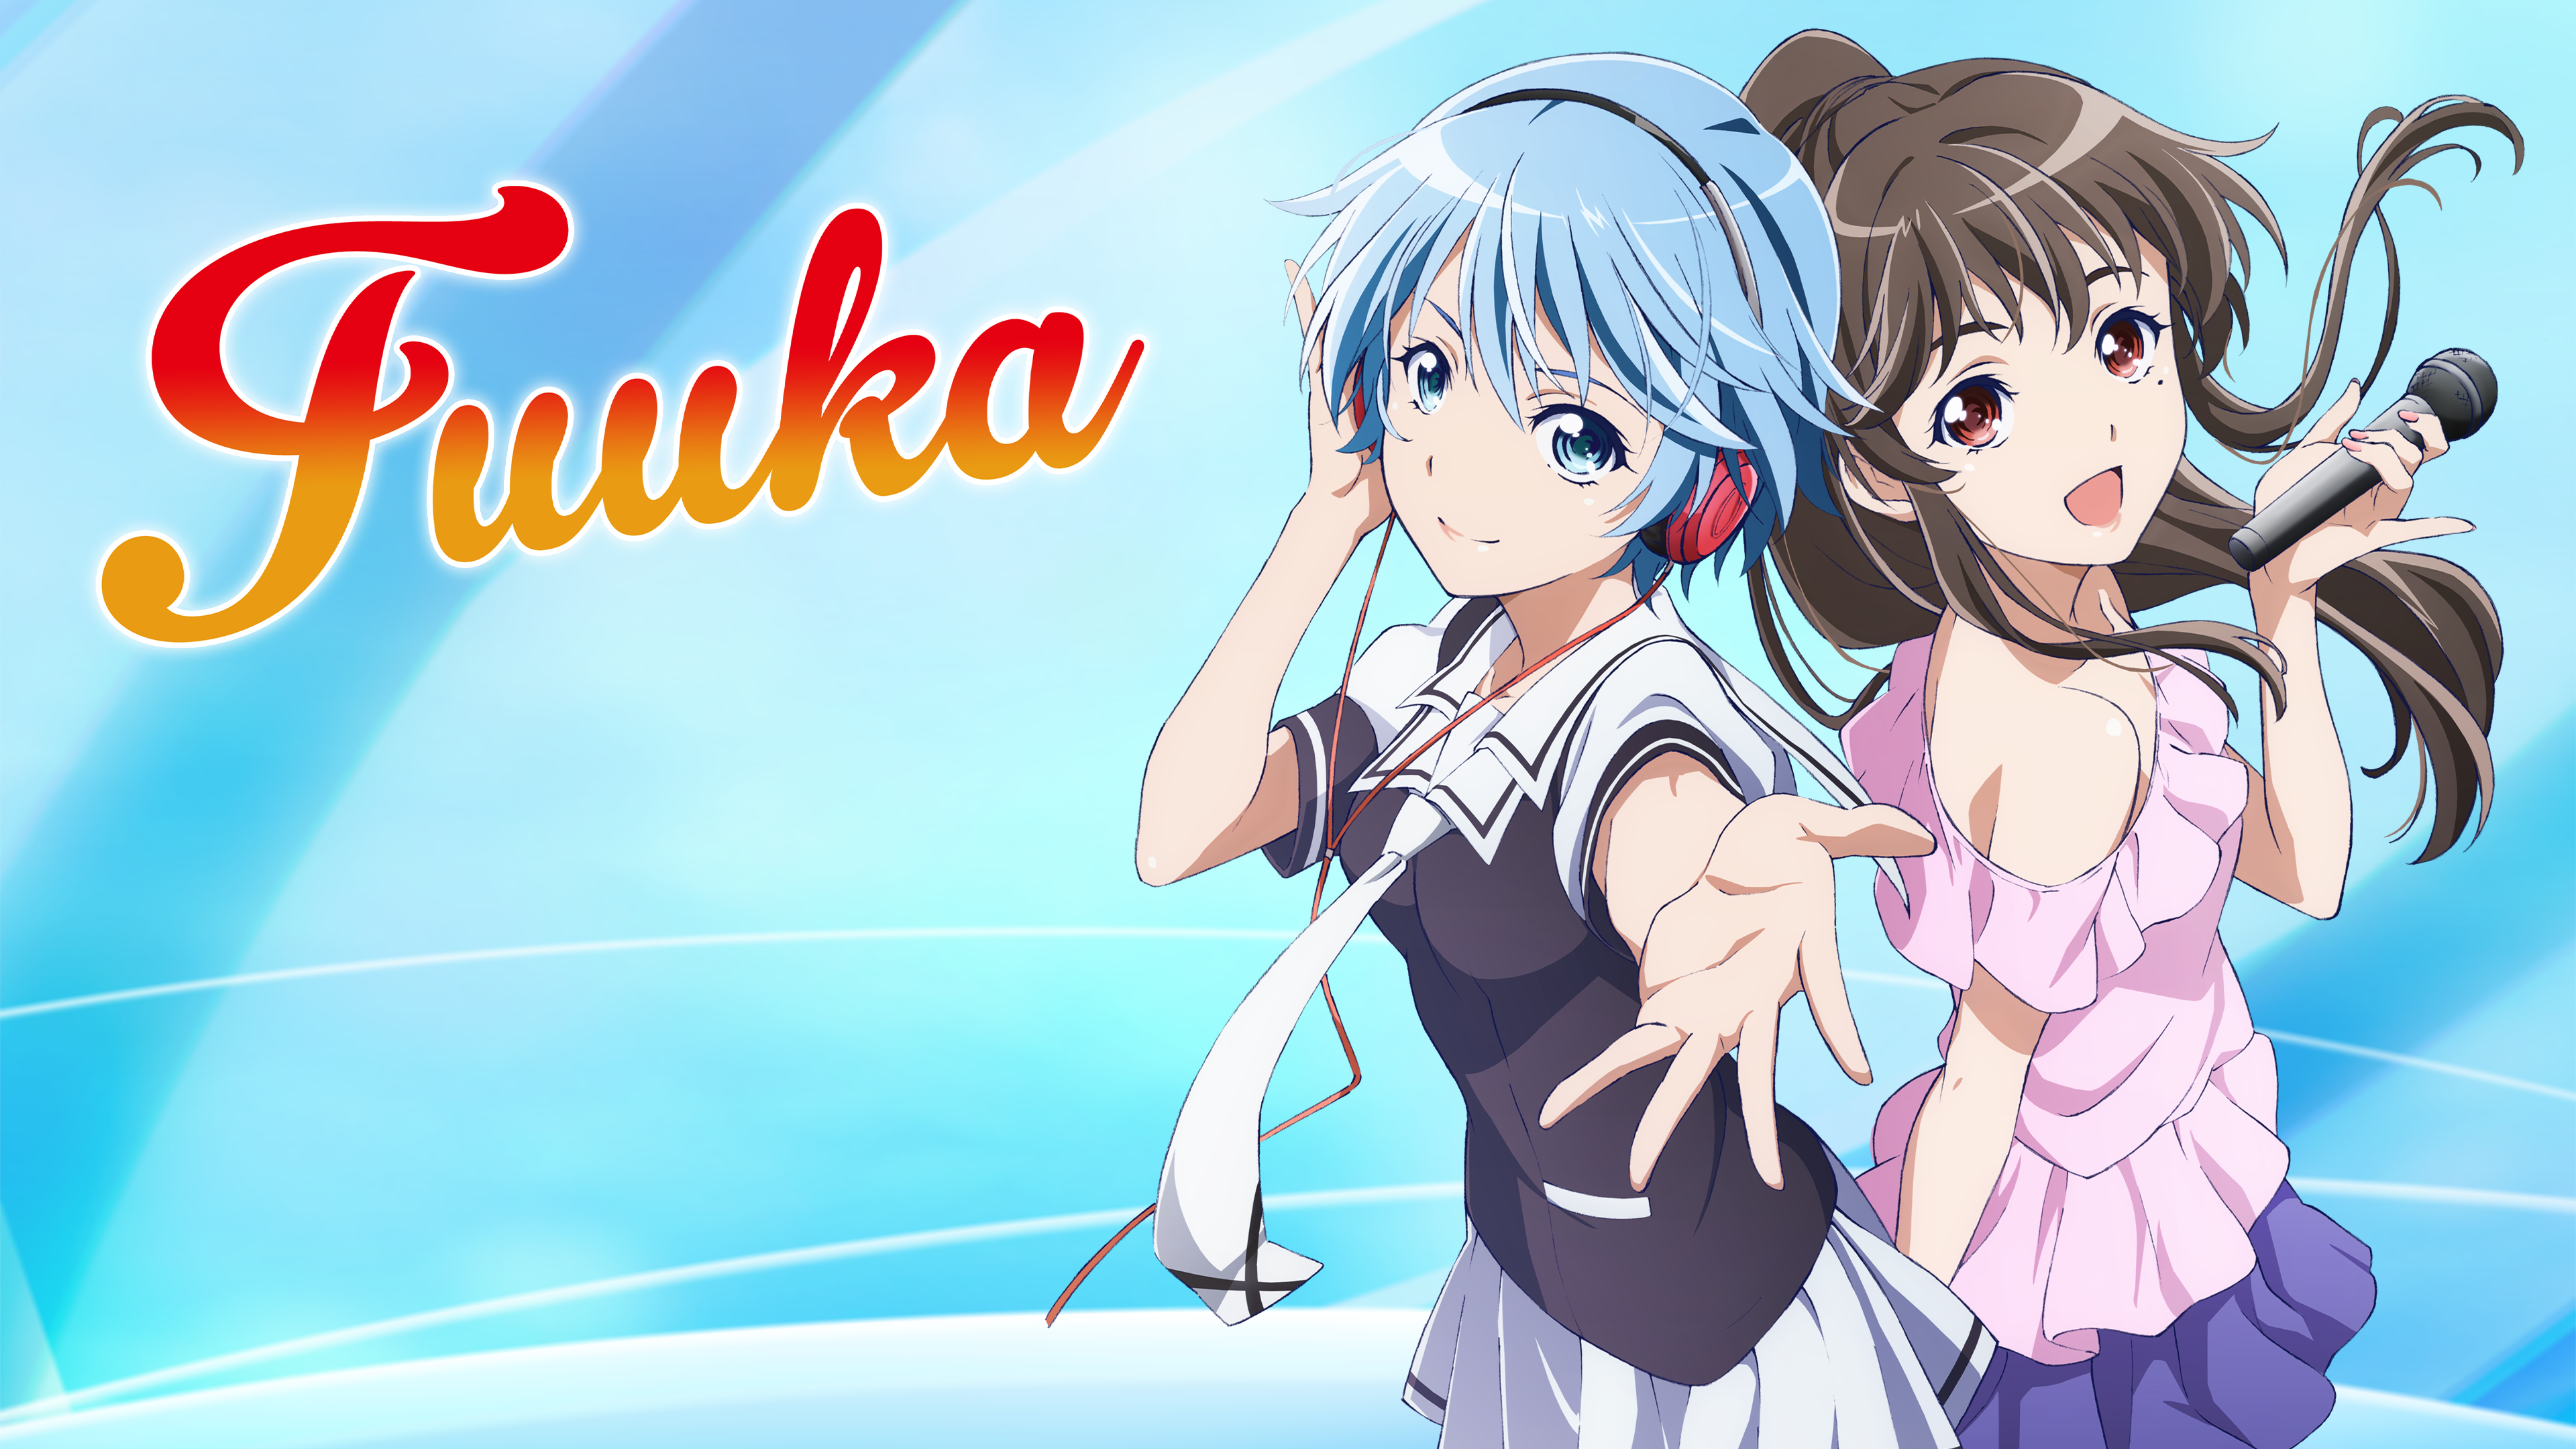 Fuuka Season 2: Release Date, Cast, Plot and Other Details!